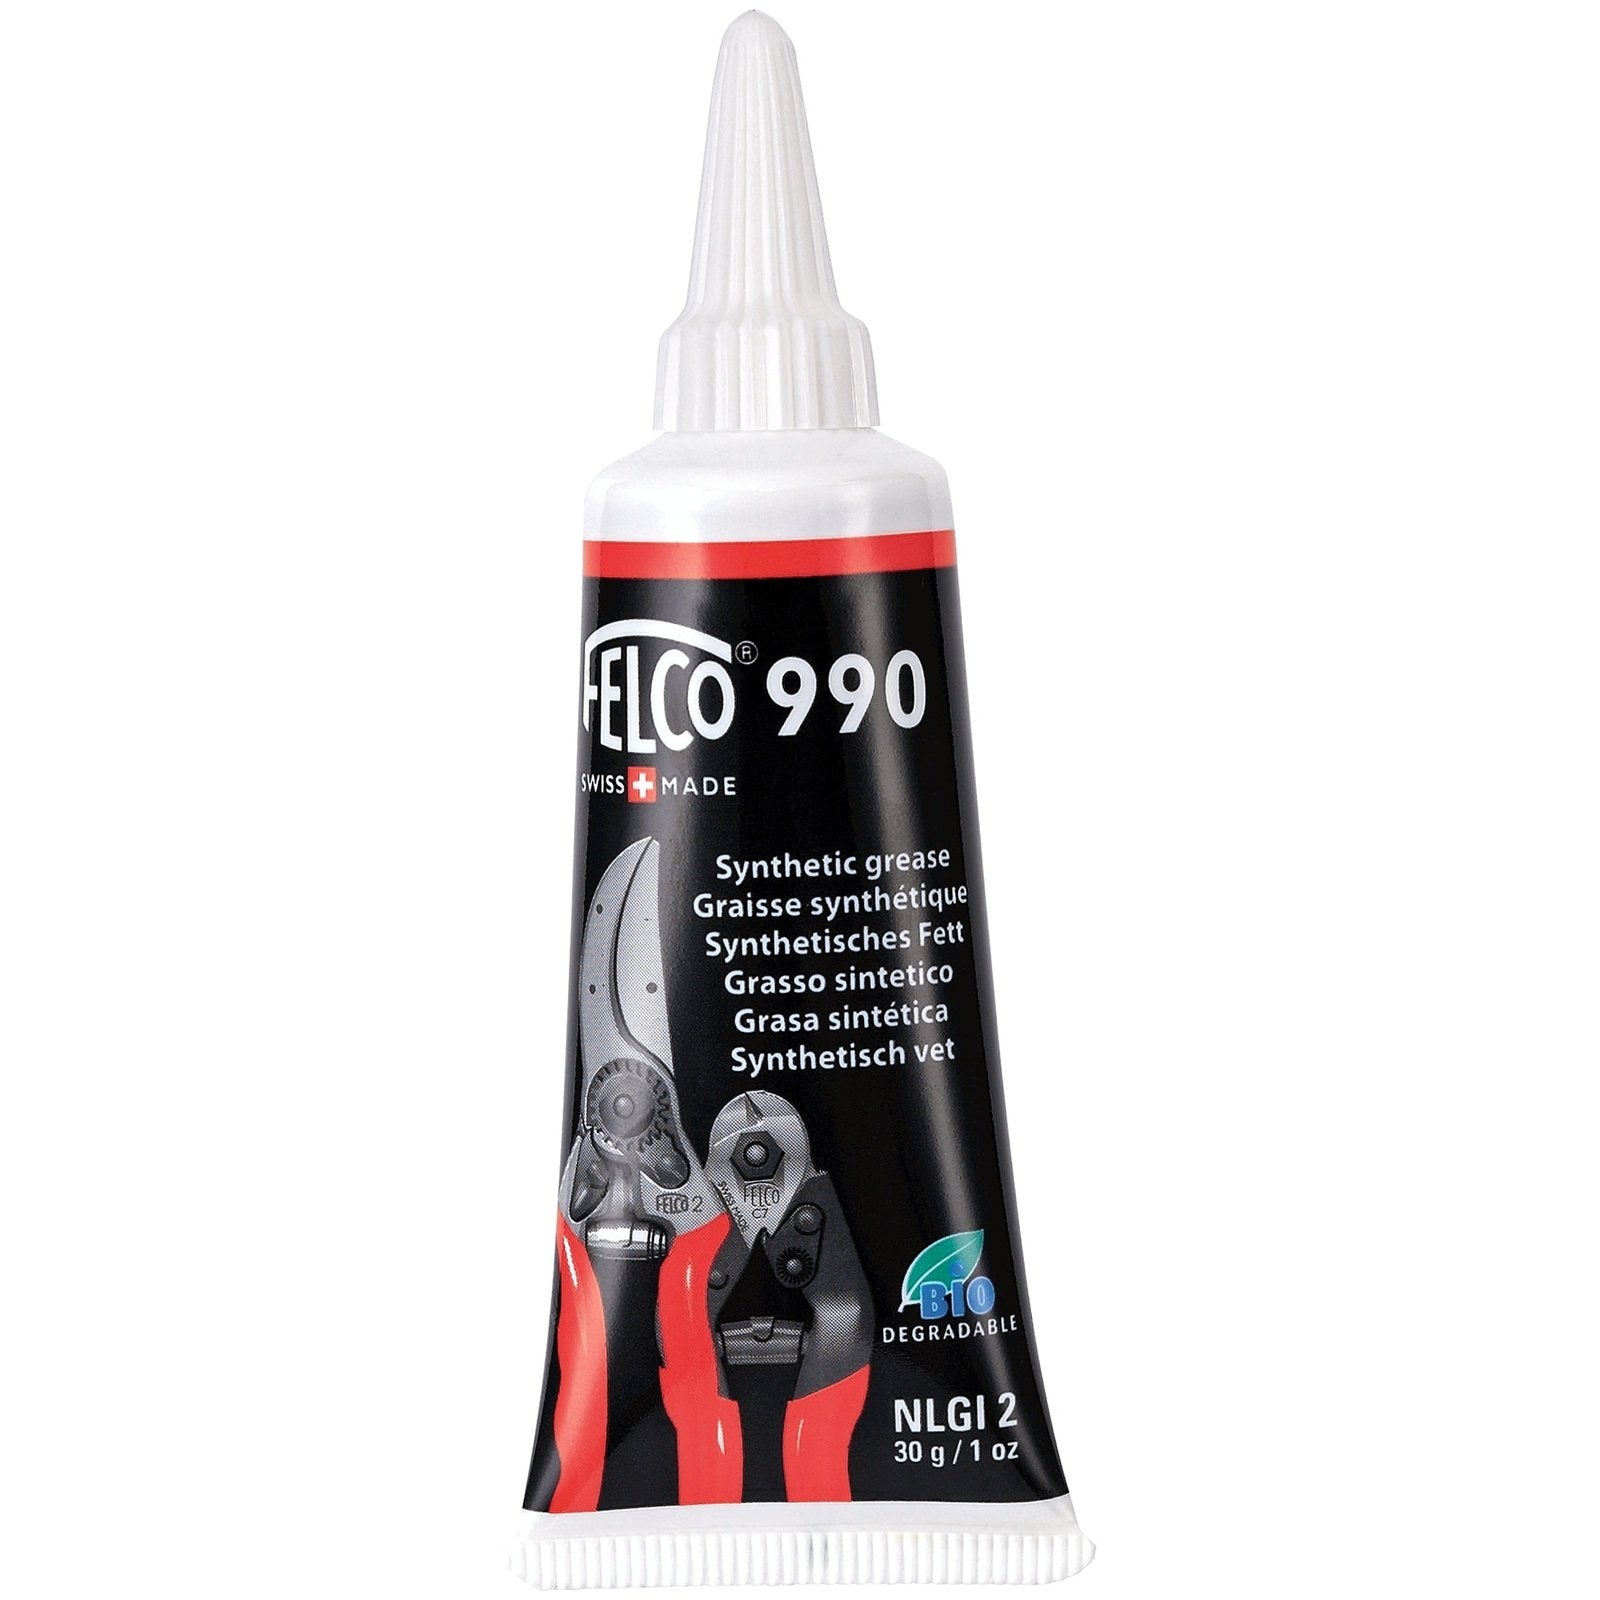 Felco 990 Maintenance Product Grease